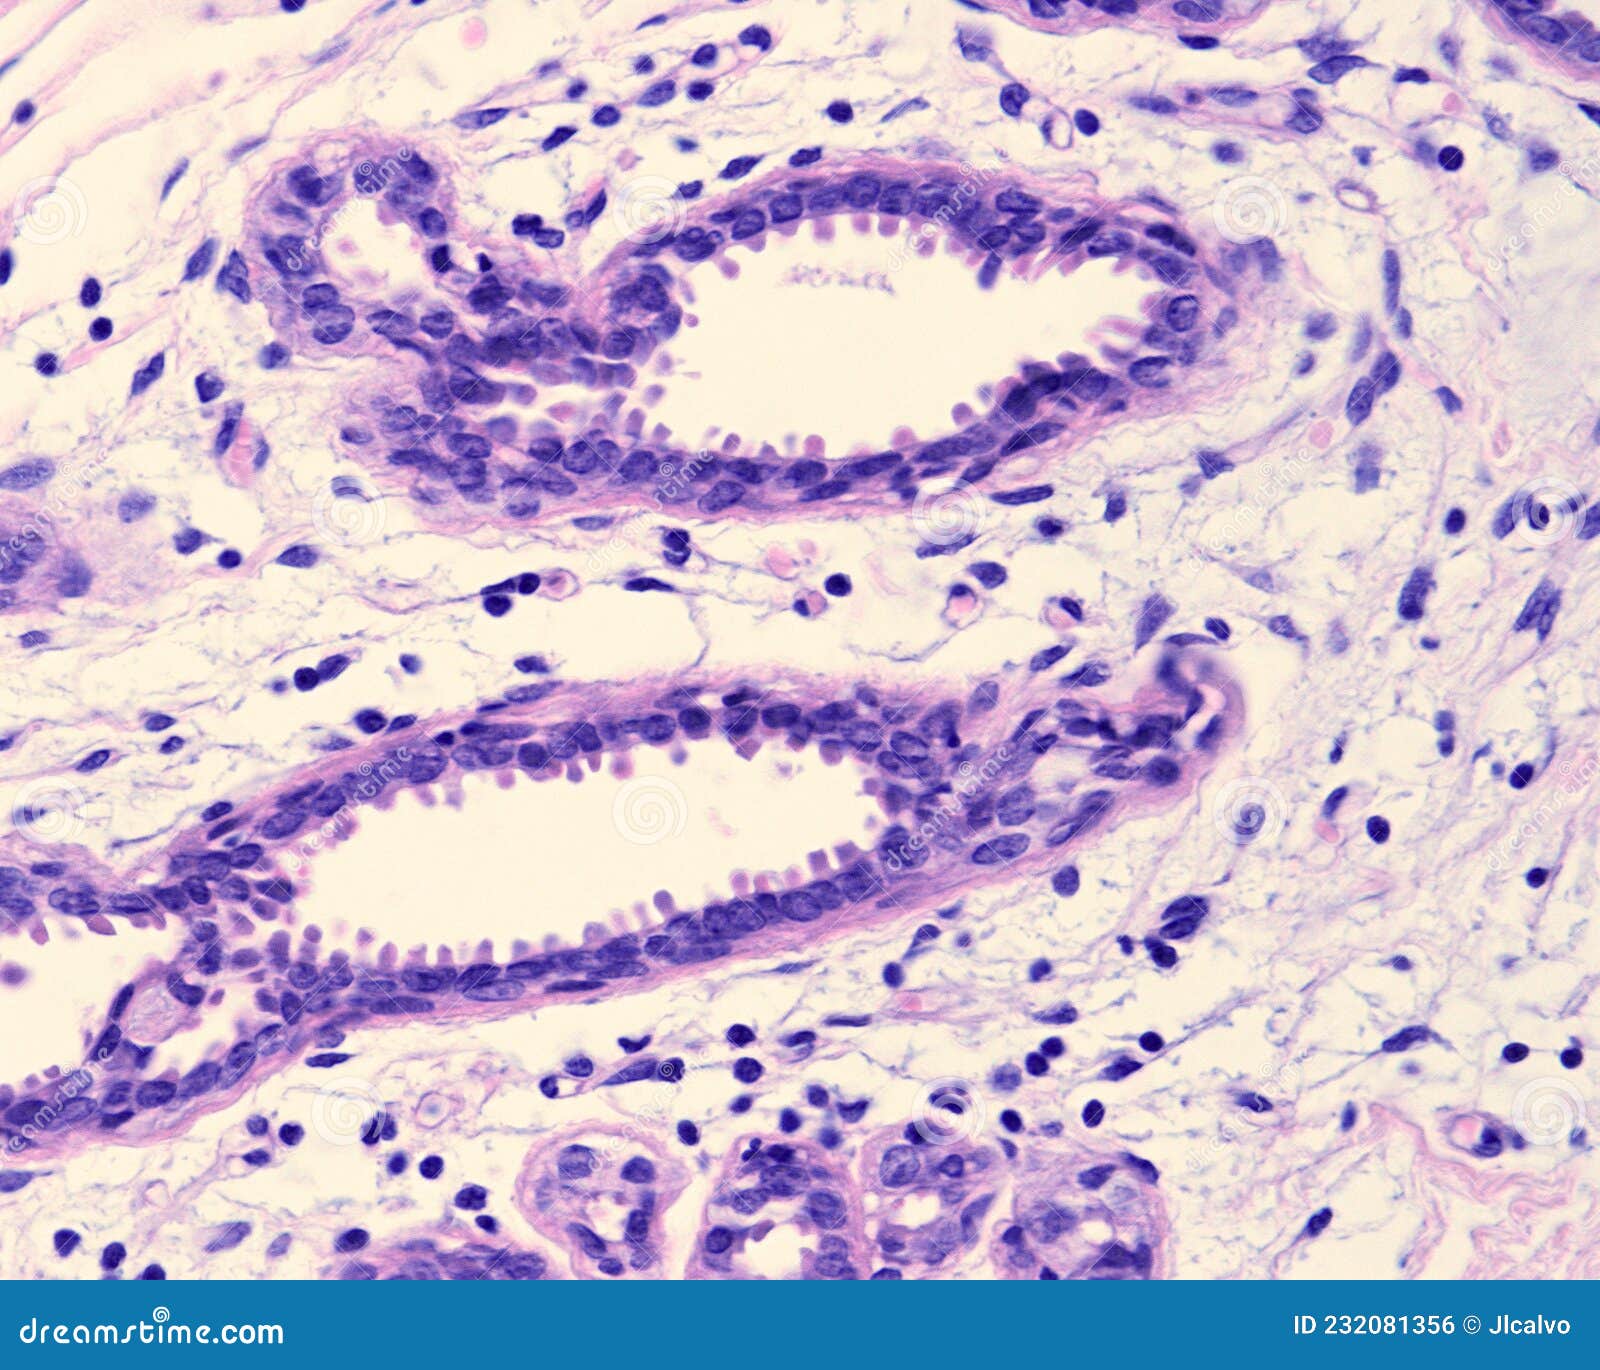 Human breast gland. Adenosis. Columnar cell or blunt duct adenosis. The terminal duct lobular units TDLU show dilated acini lined by tightly packed columnar epithelial cells with prominent apical cytoplasmic snouts